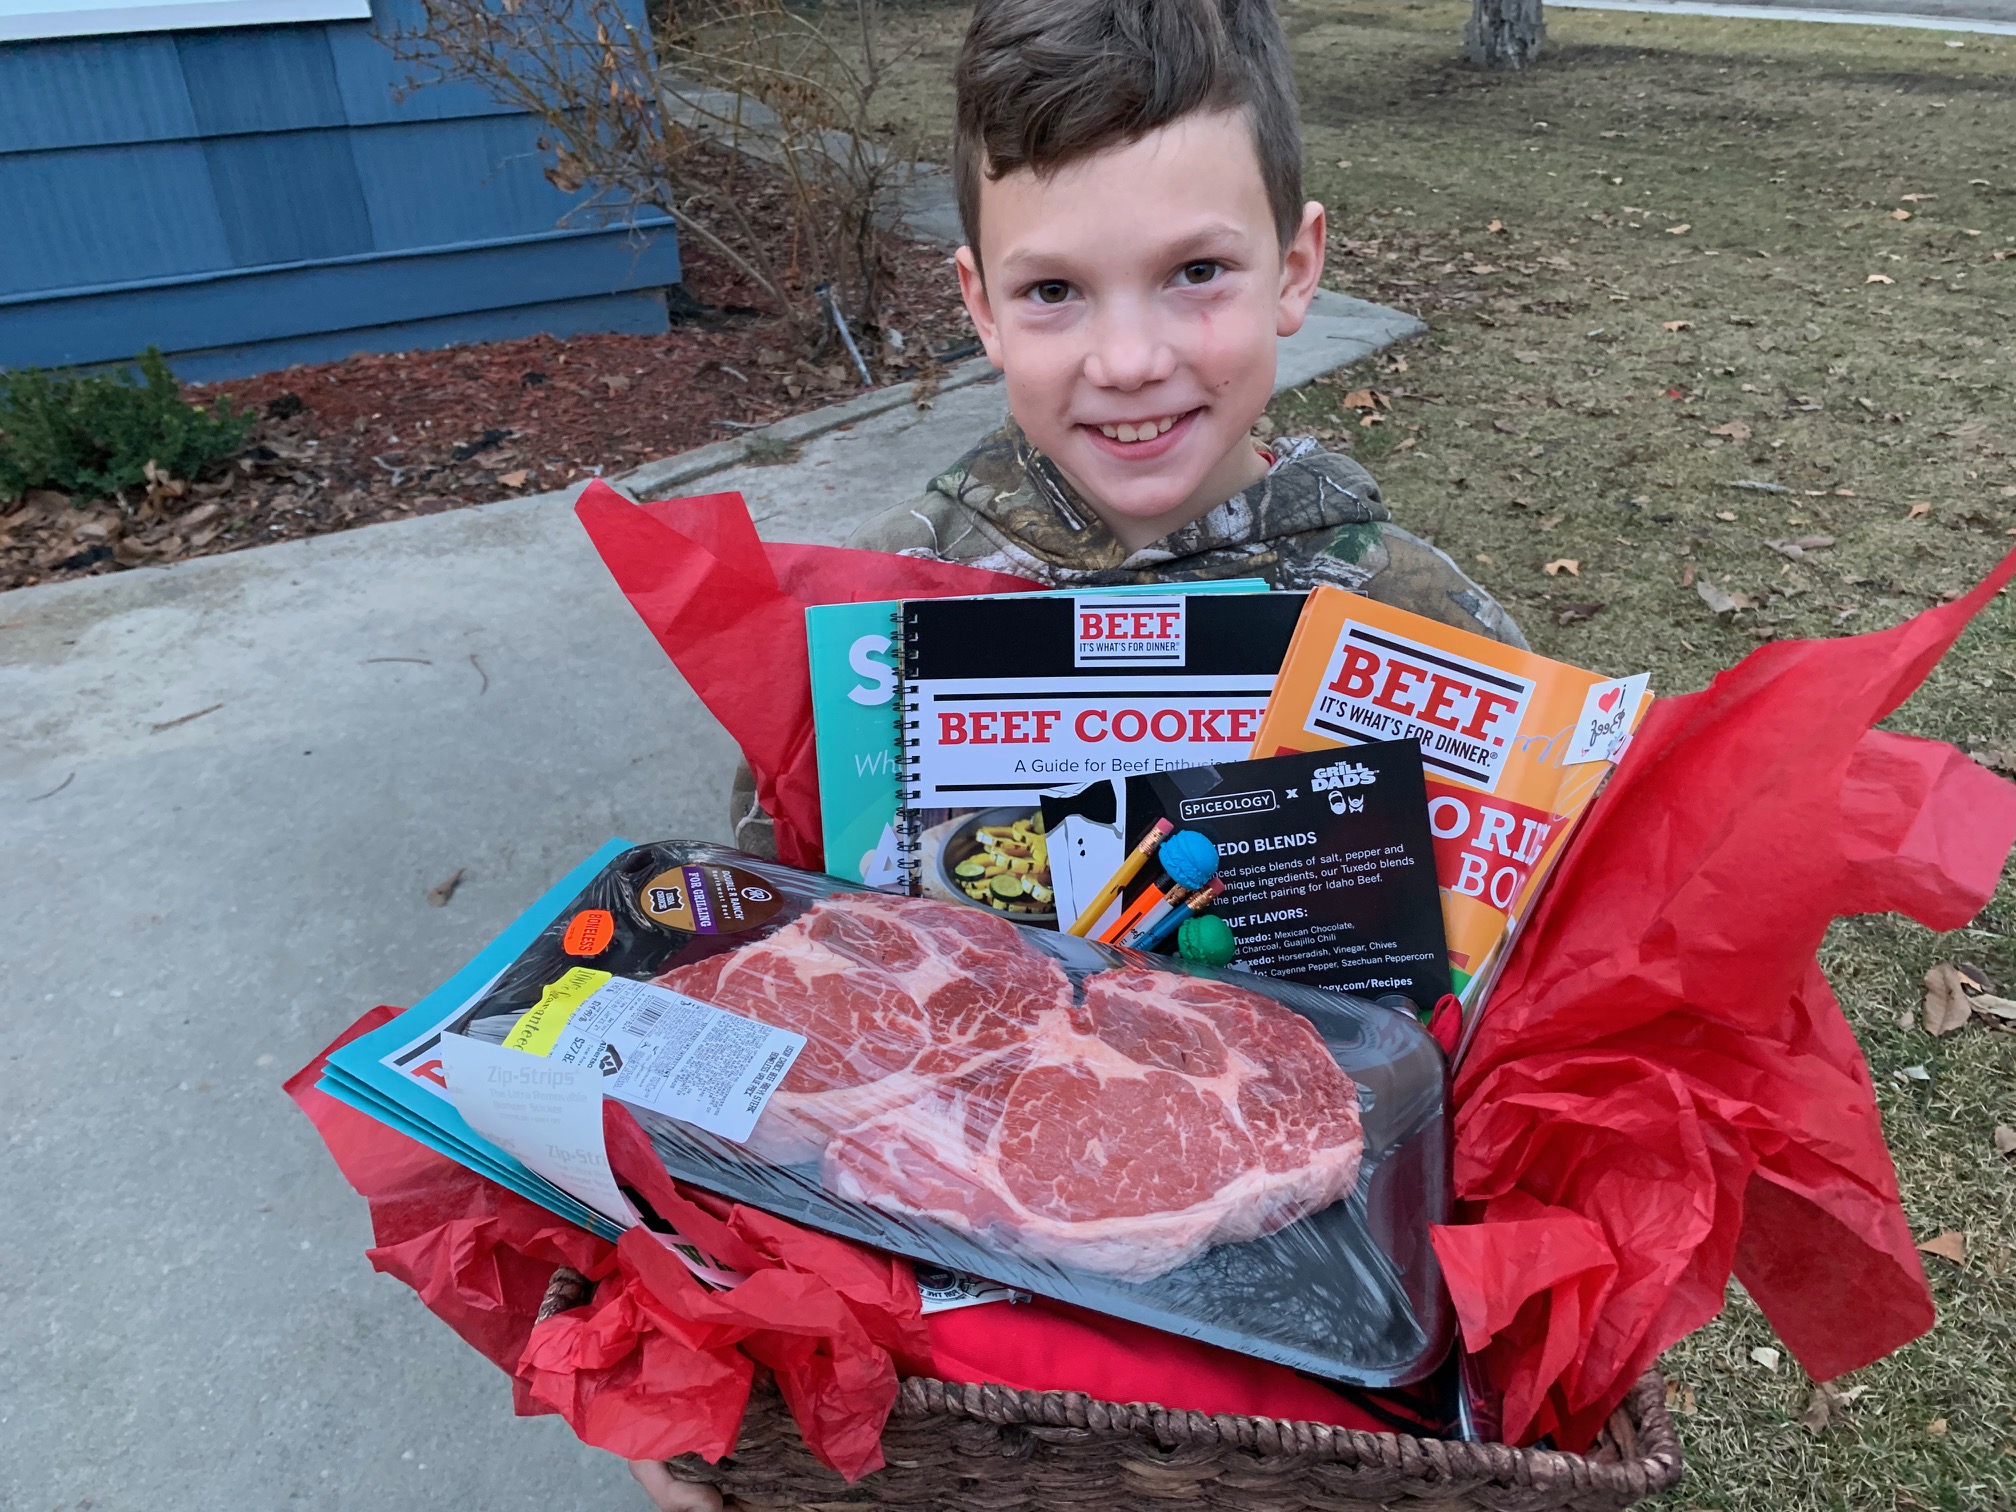 Nampa Boy’s Love of Steak Results in Surprise from Idaho Beef Council